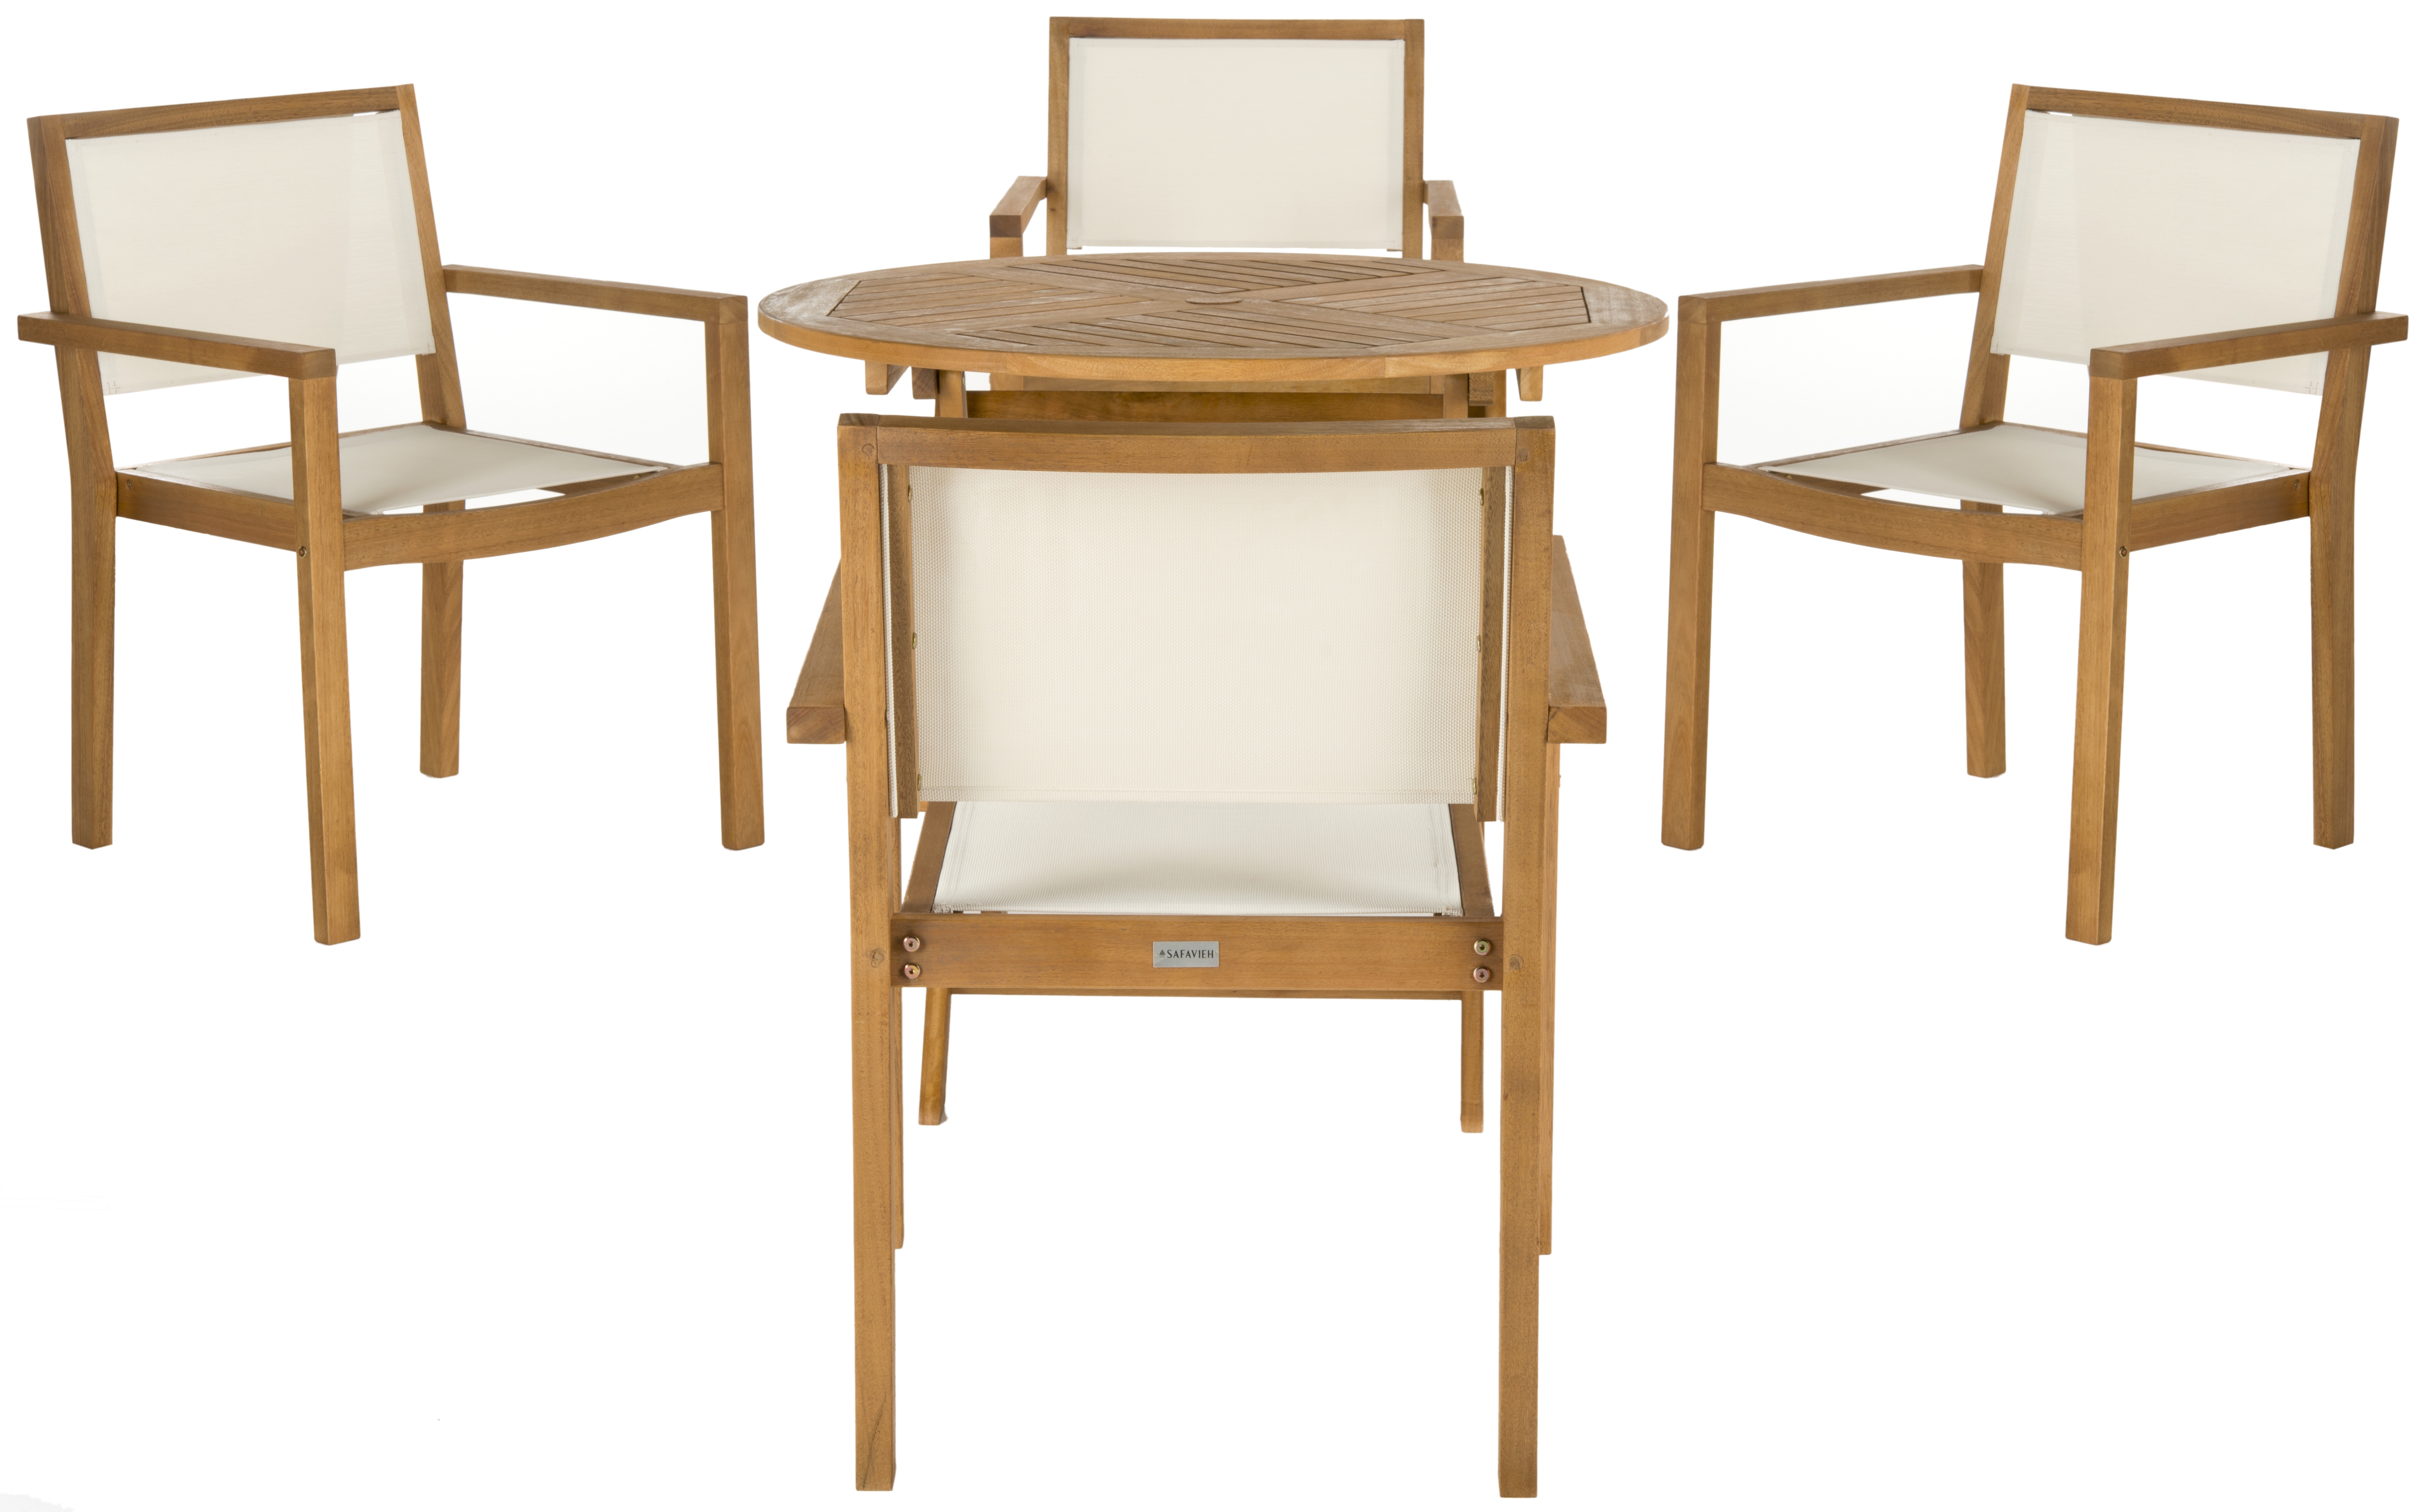 Chante 35.4-Inch Dia Round Table 5 Piece Dining Set - Natural - Arlo Home - Arlo Home